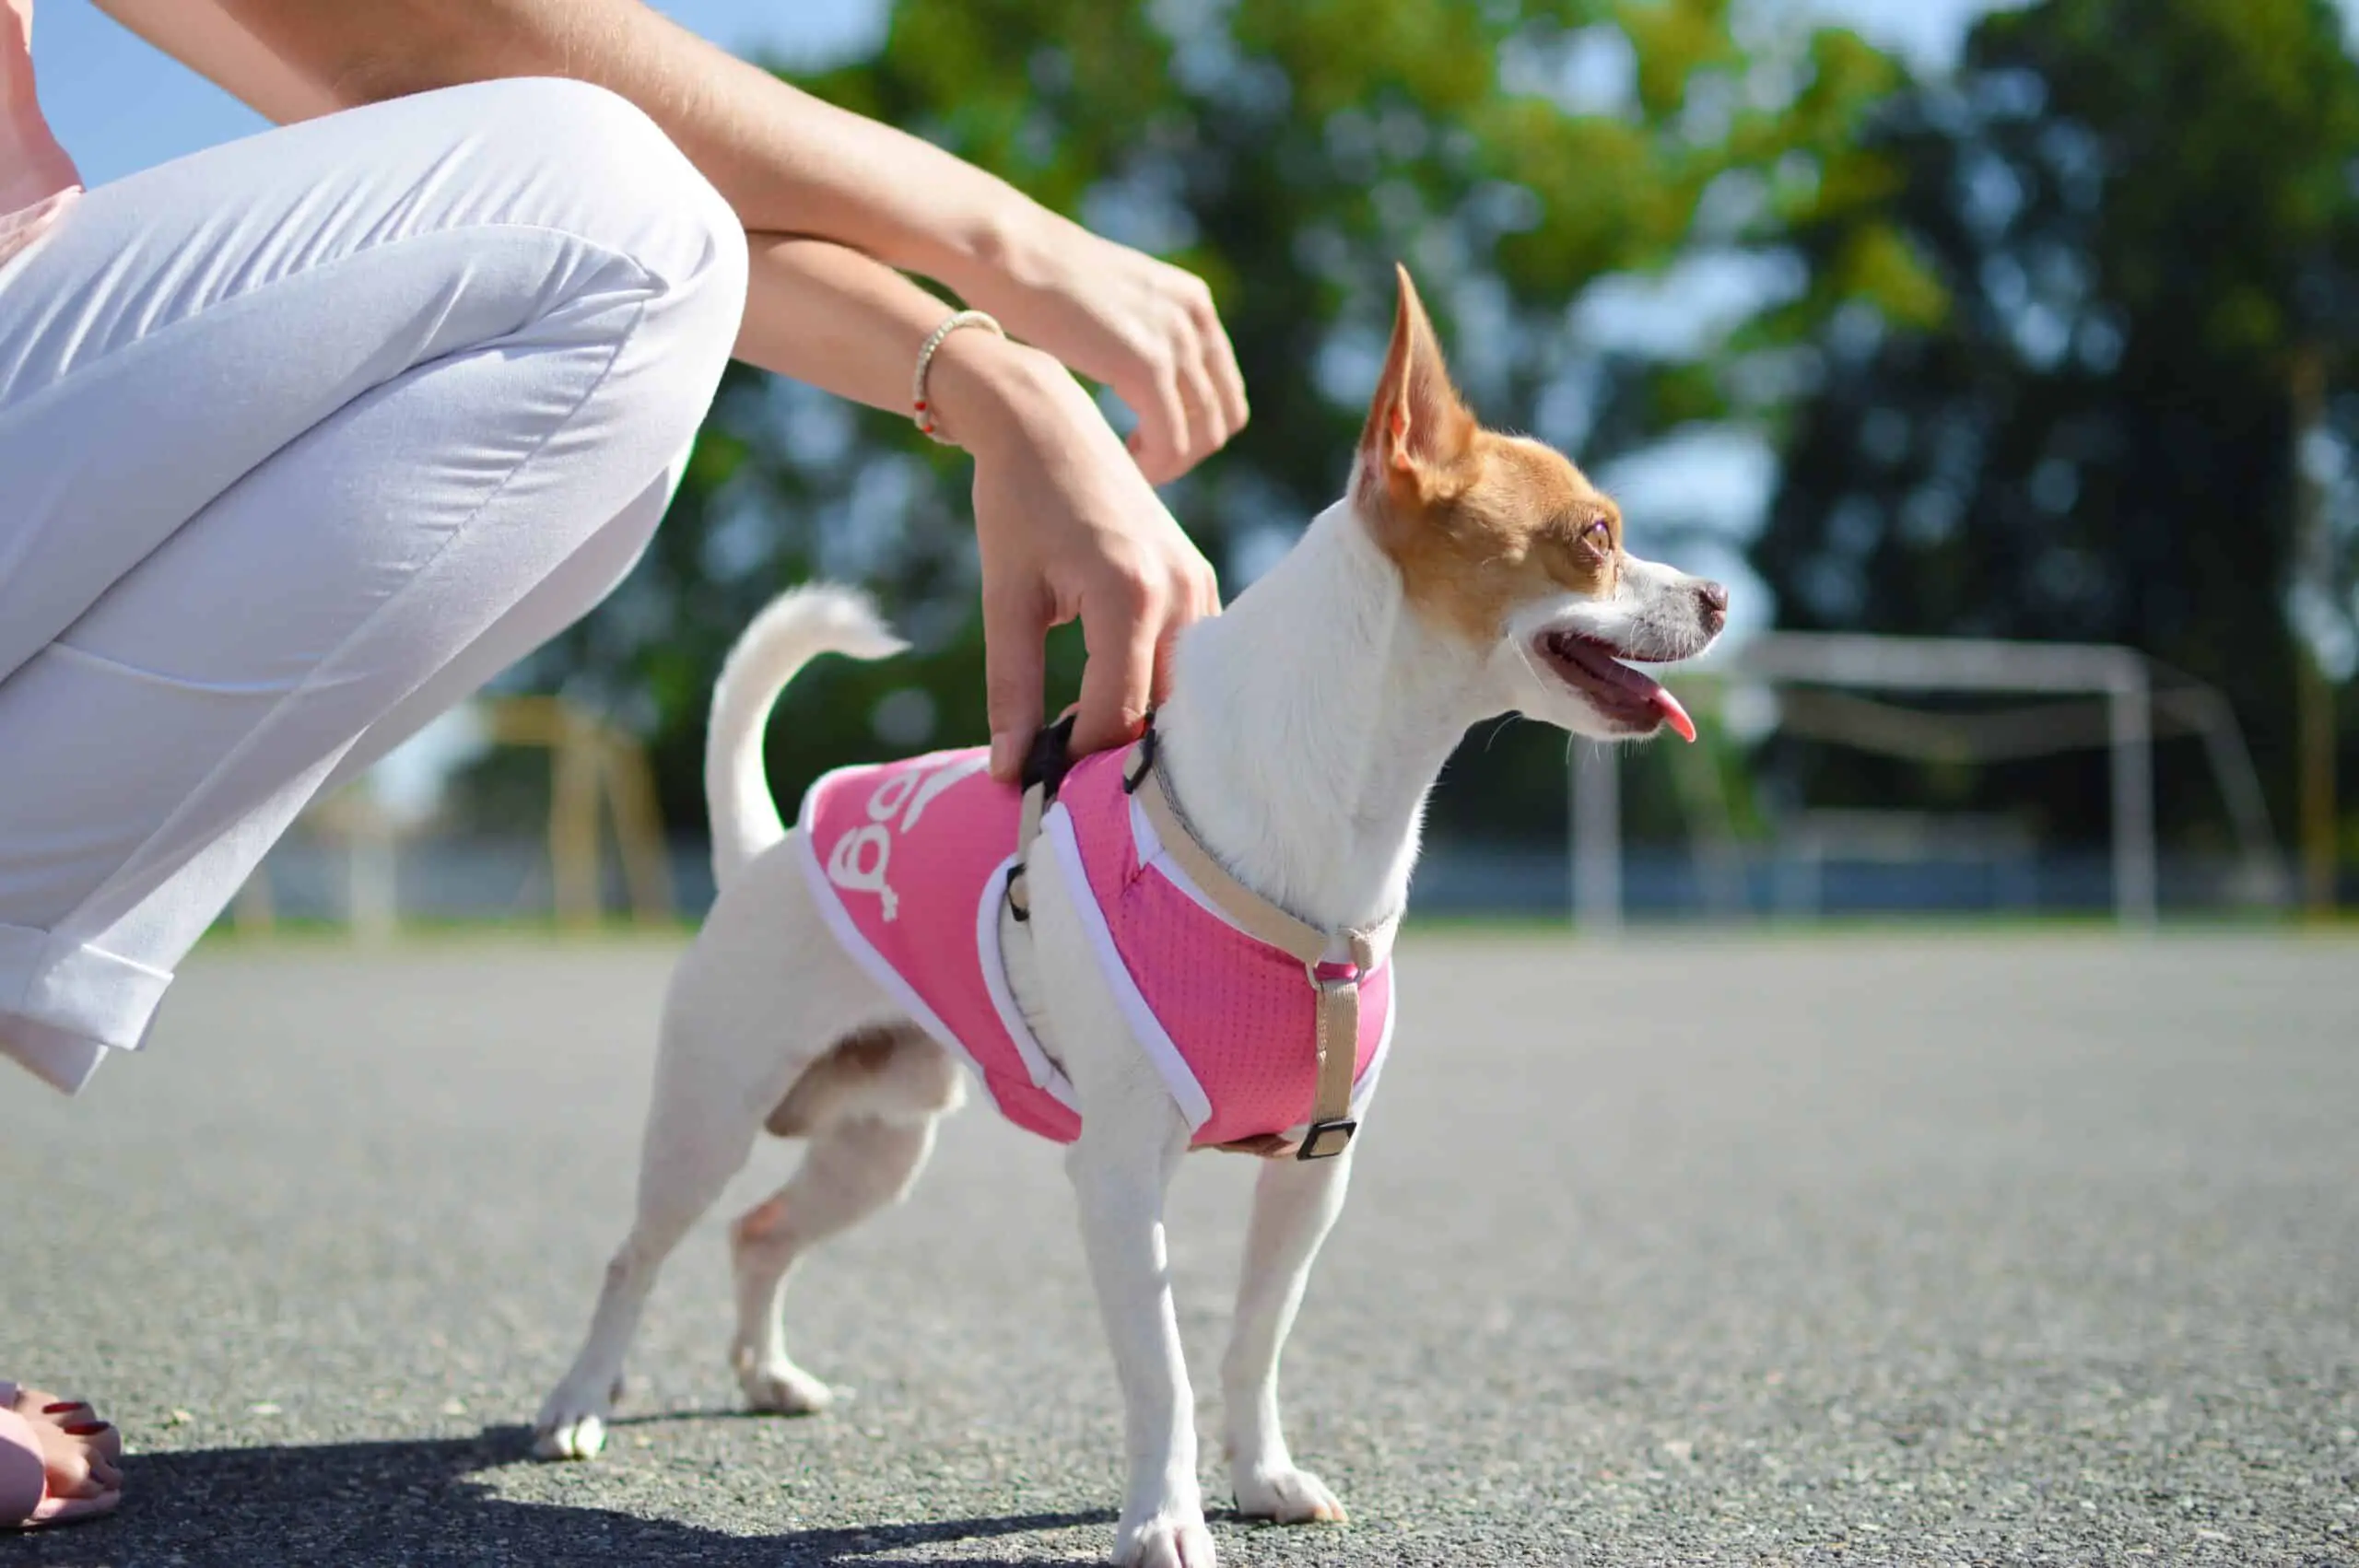 America’s Most Pet-Friendly Companies Revealed